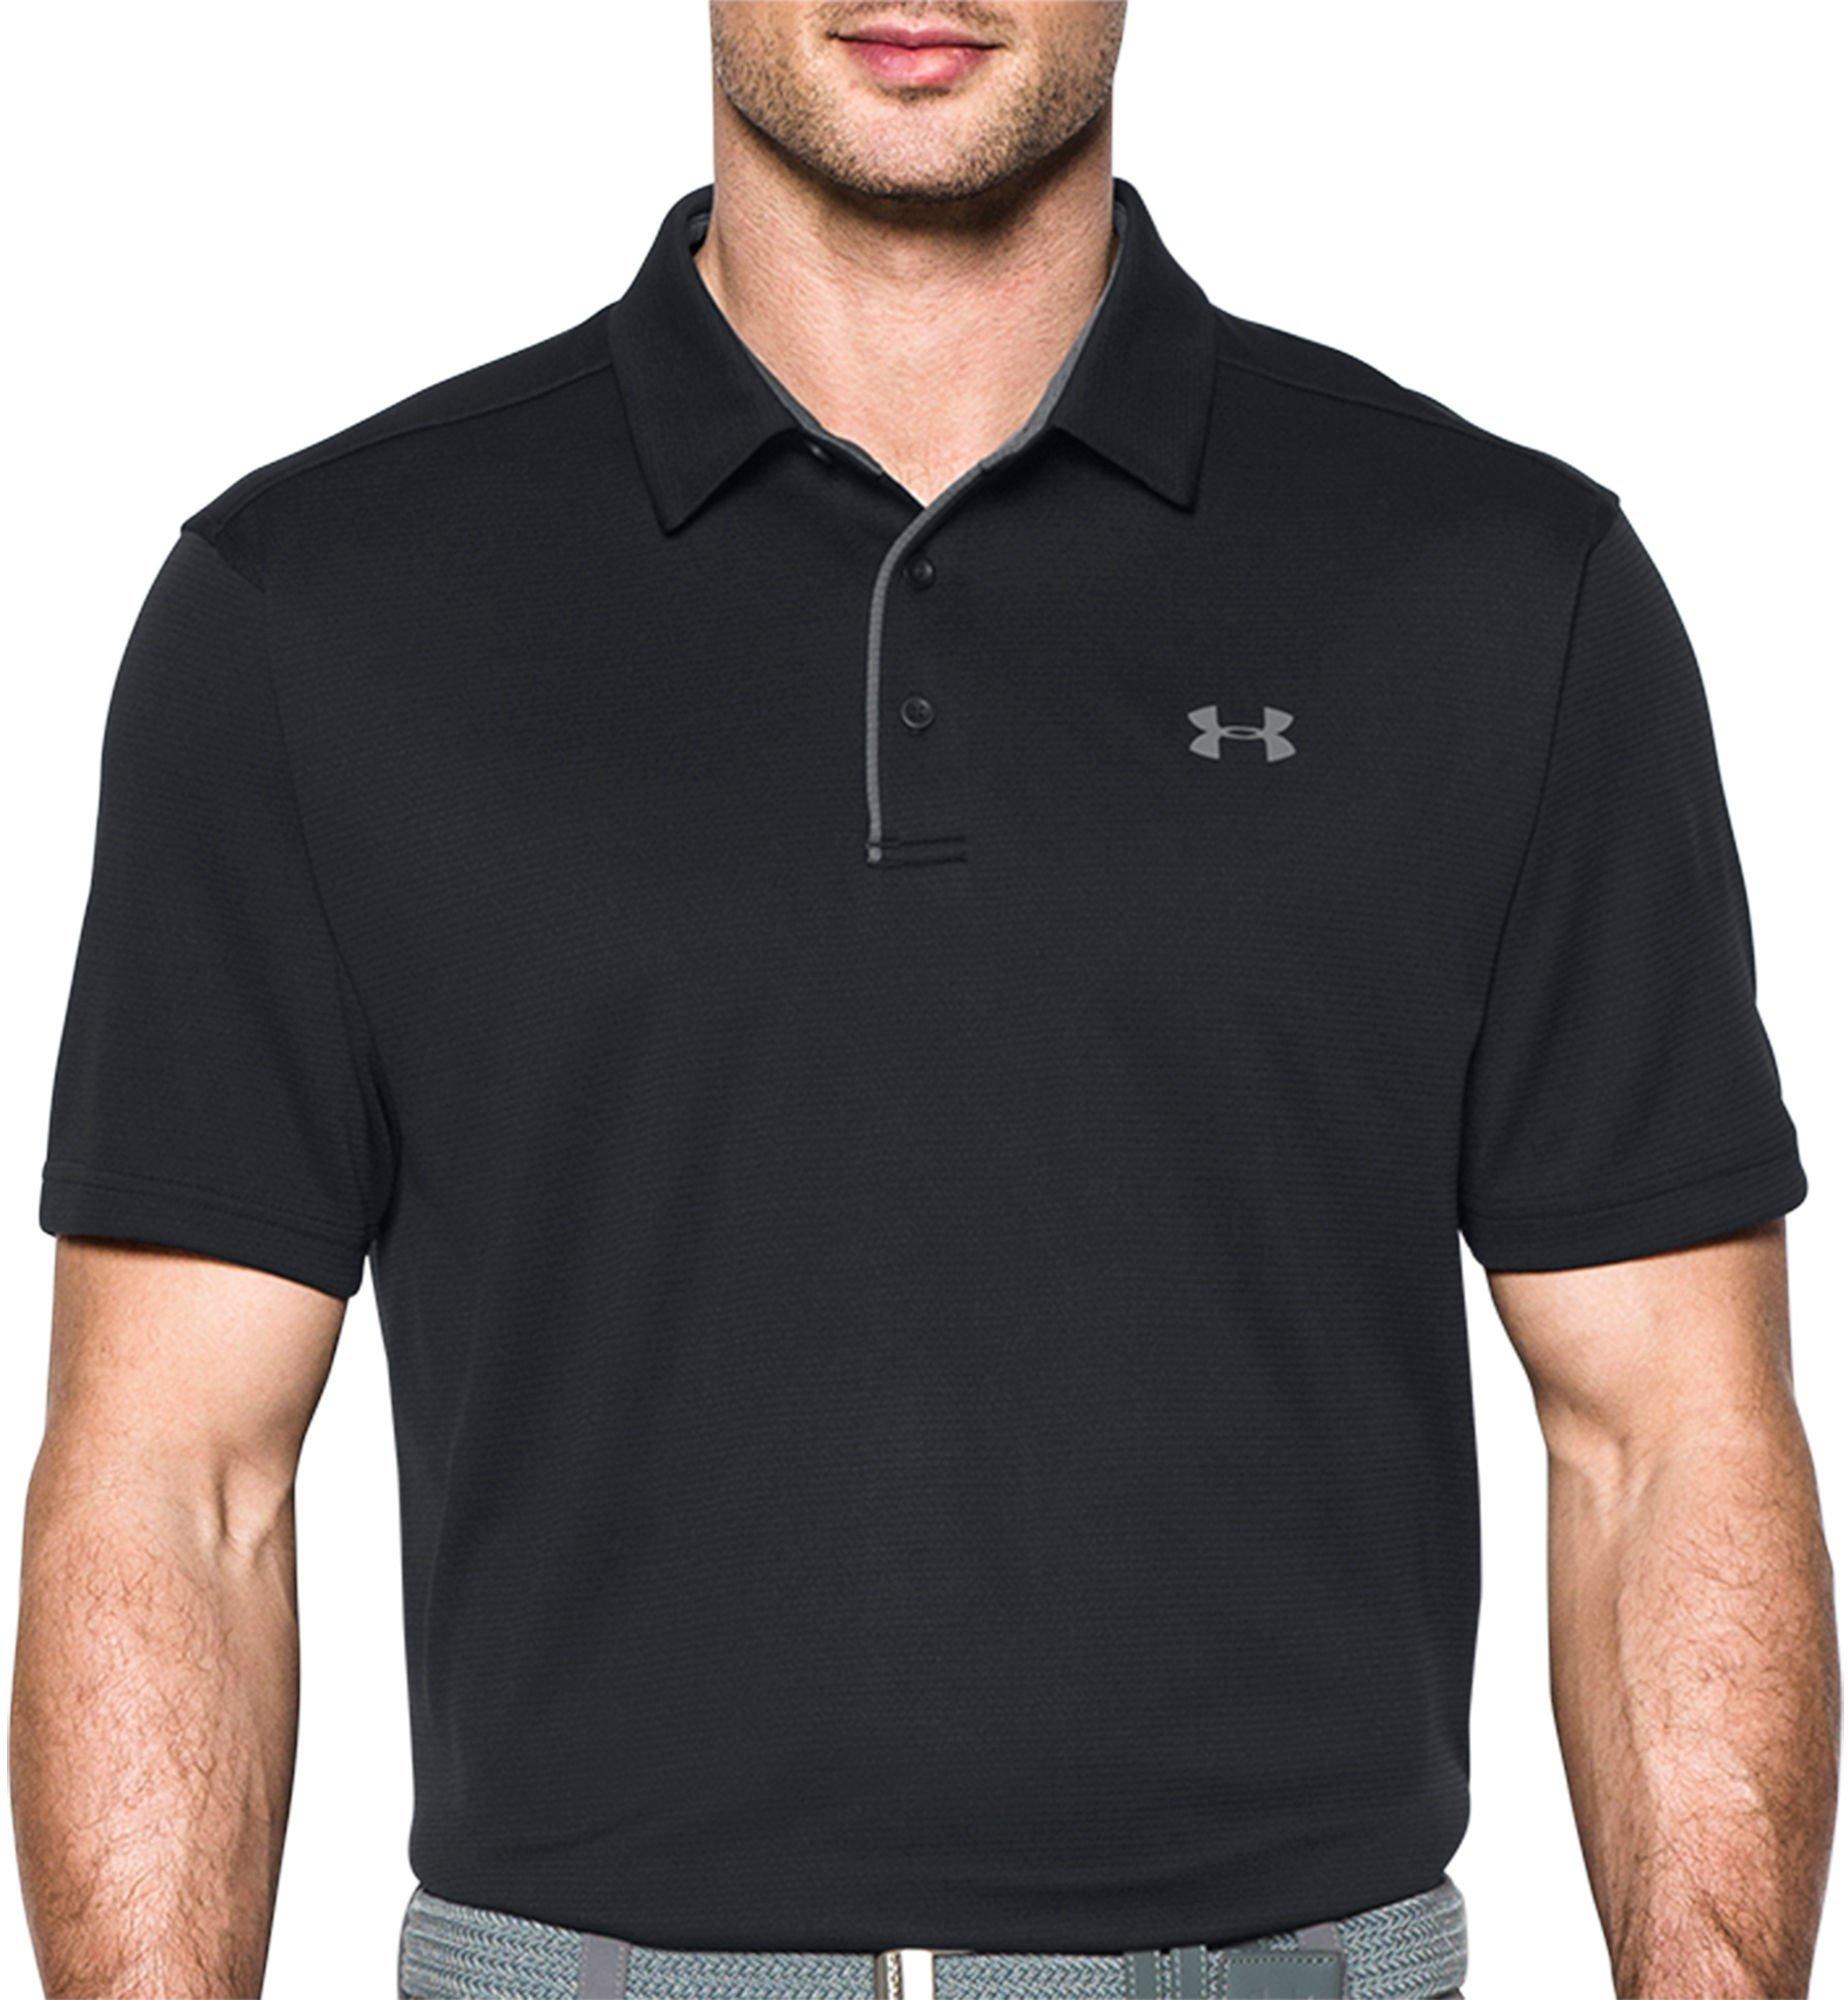 under armour polo shirts